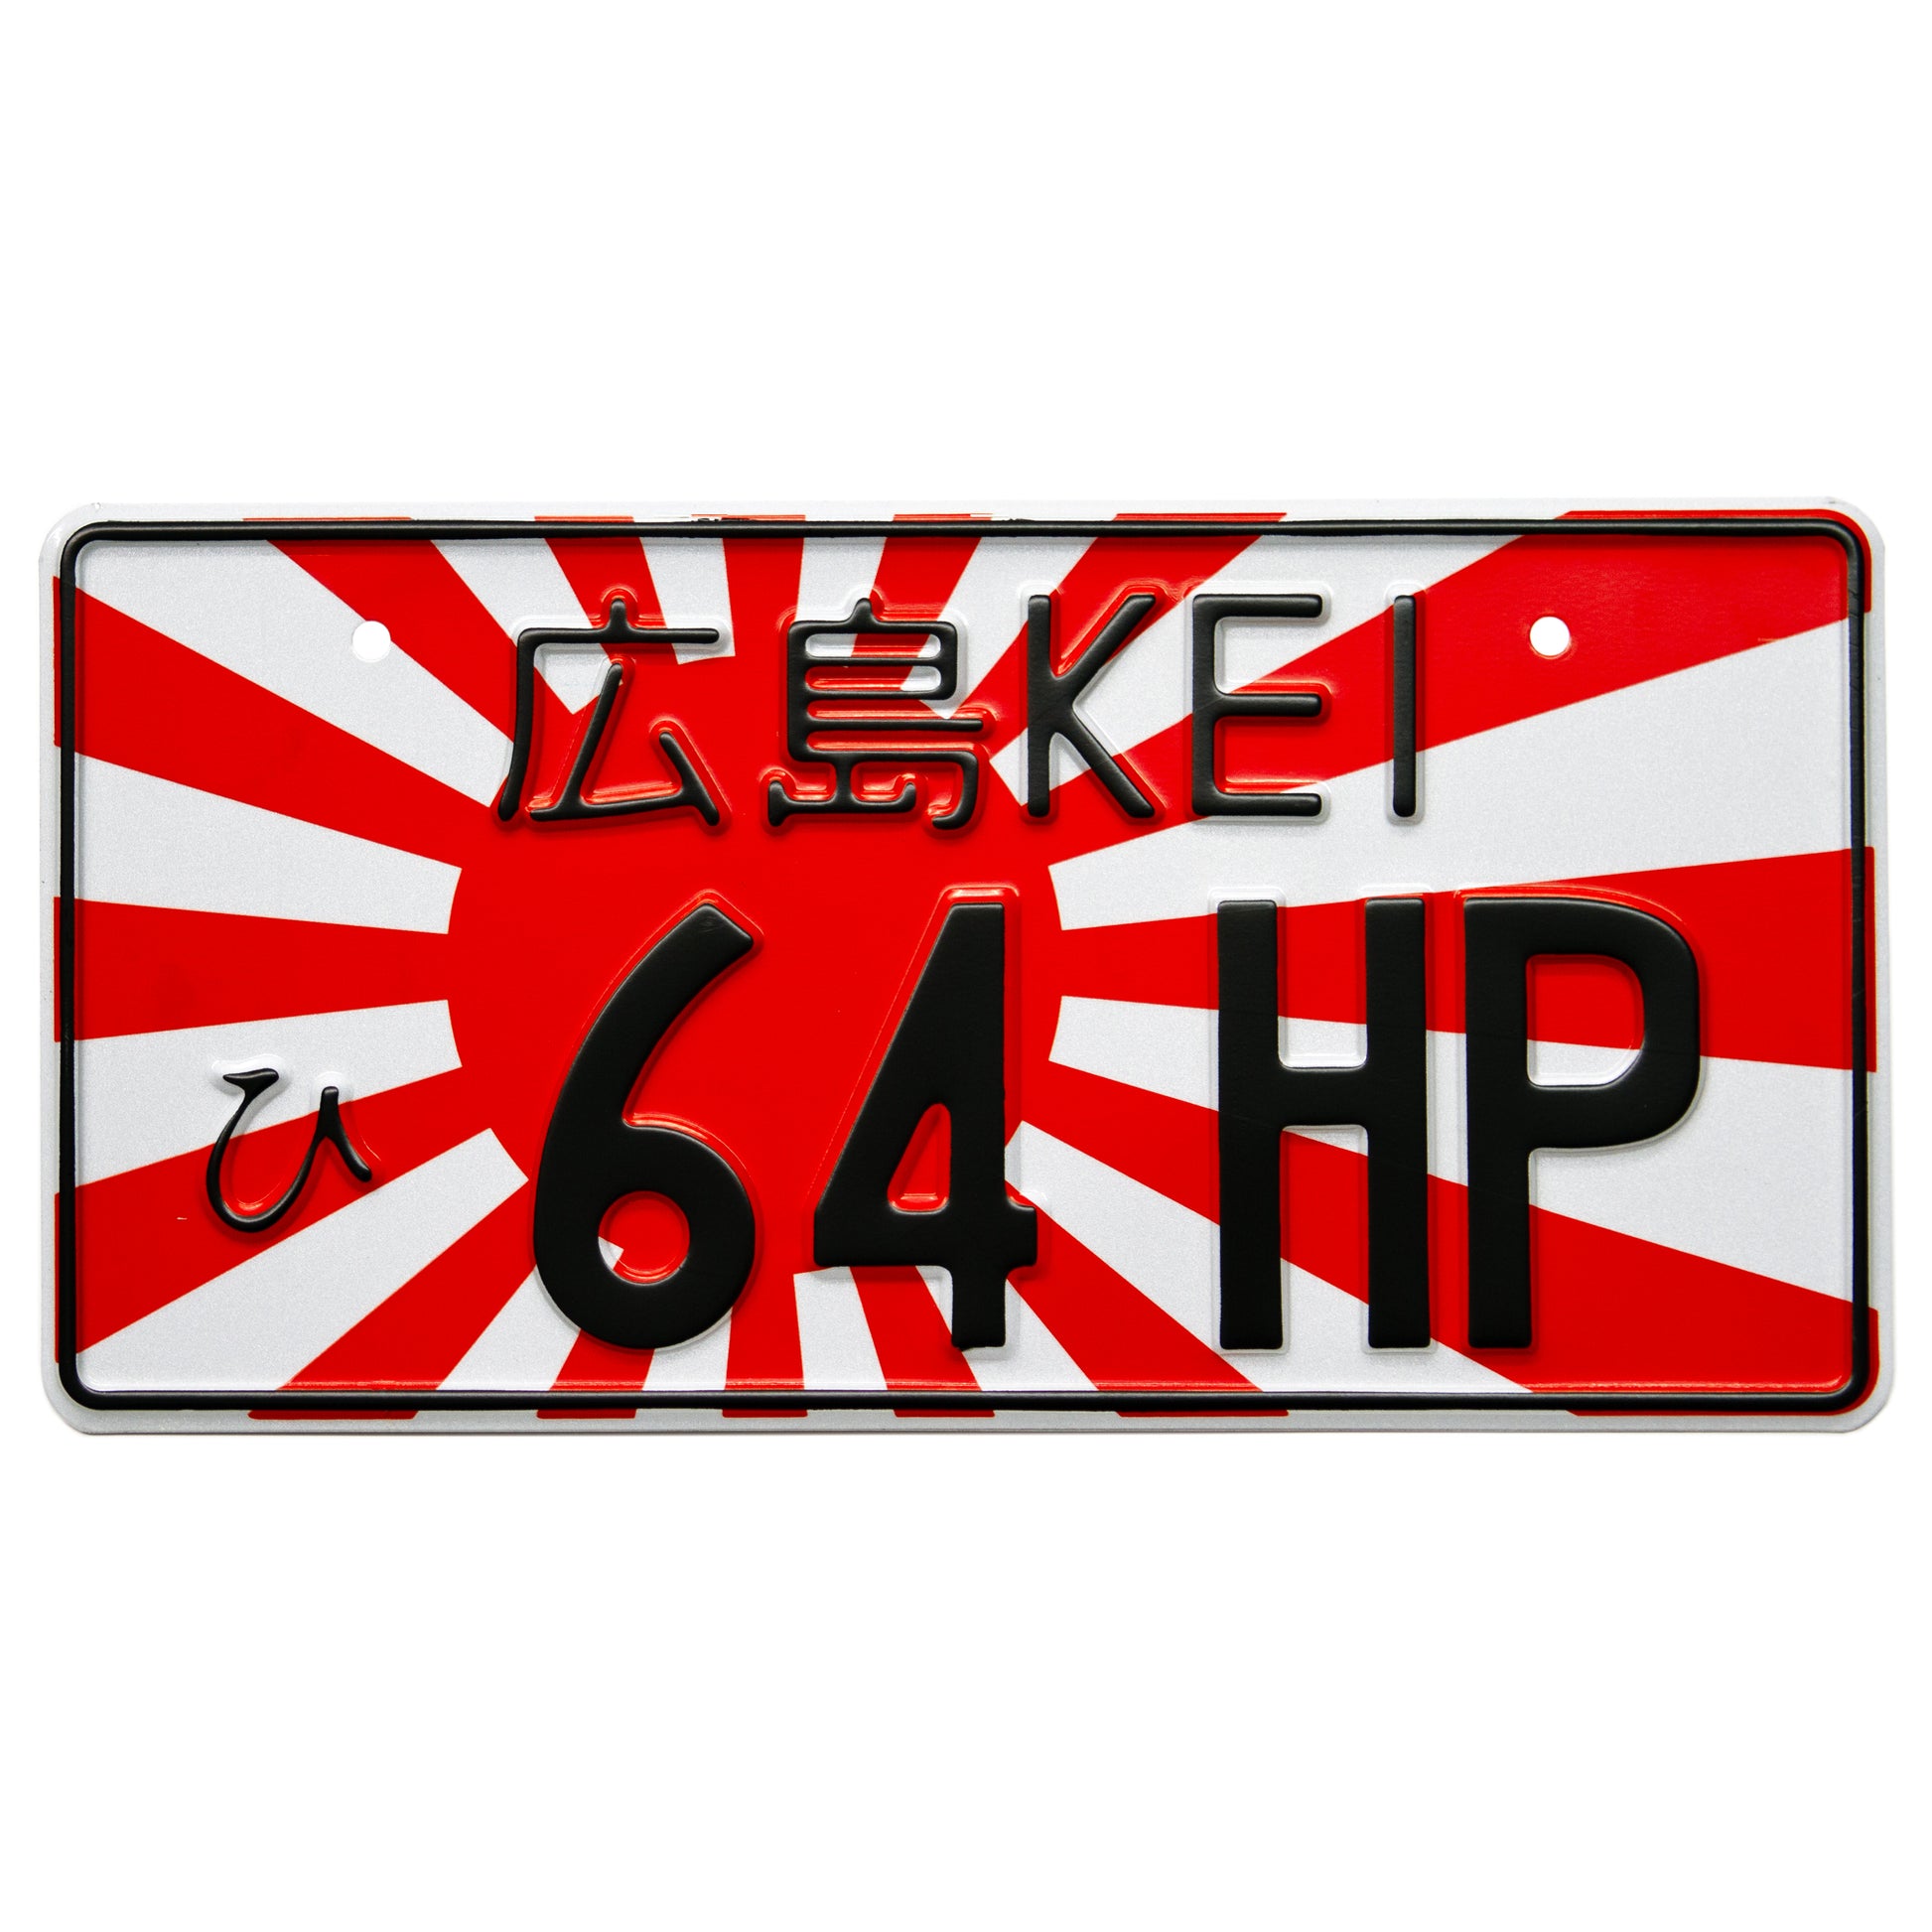 Japanese license plate rising sun with black text front view